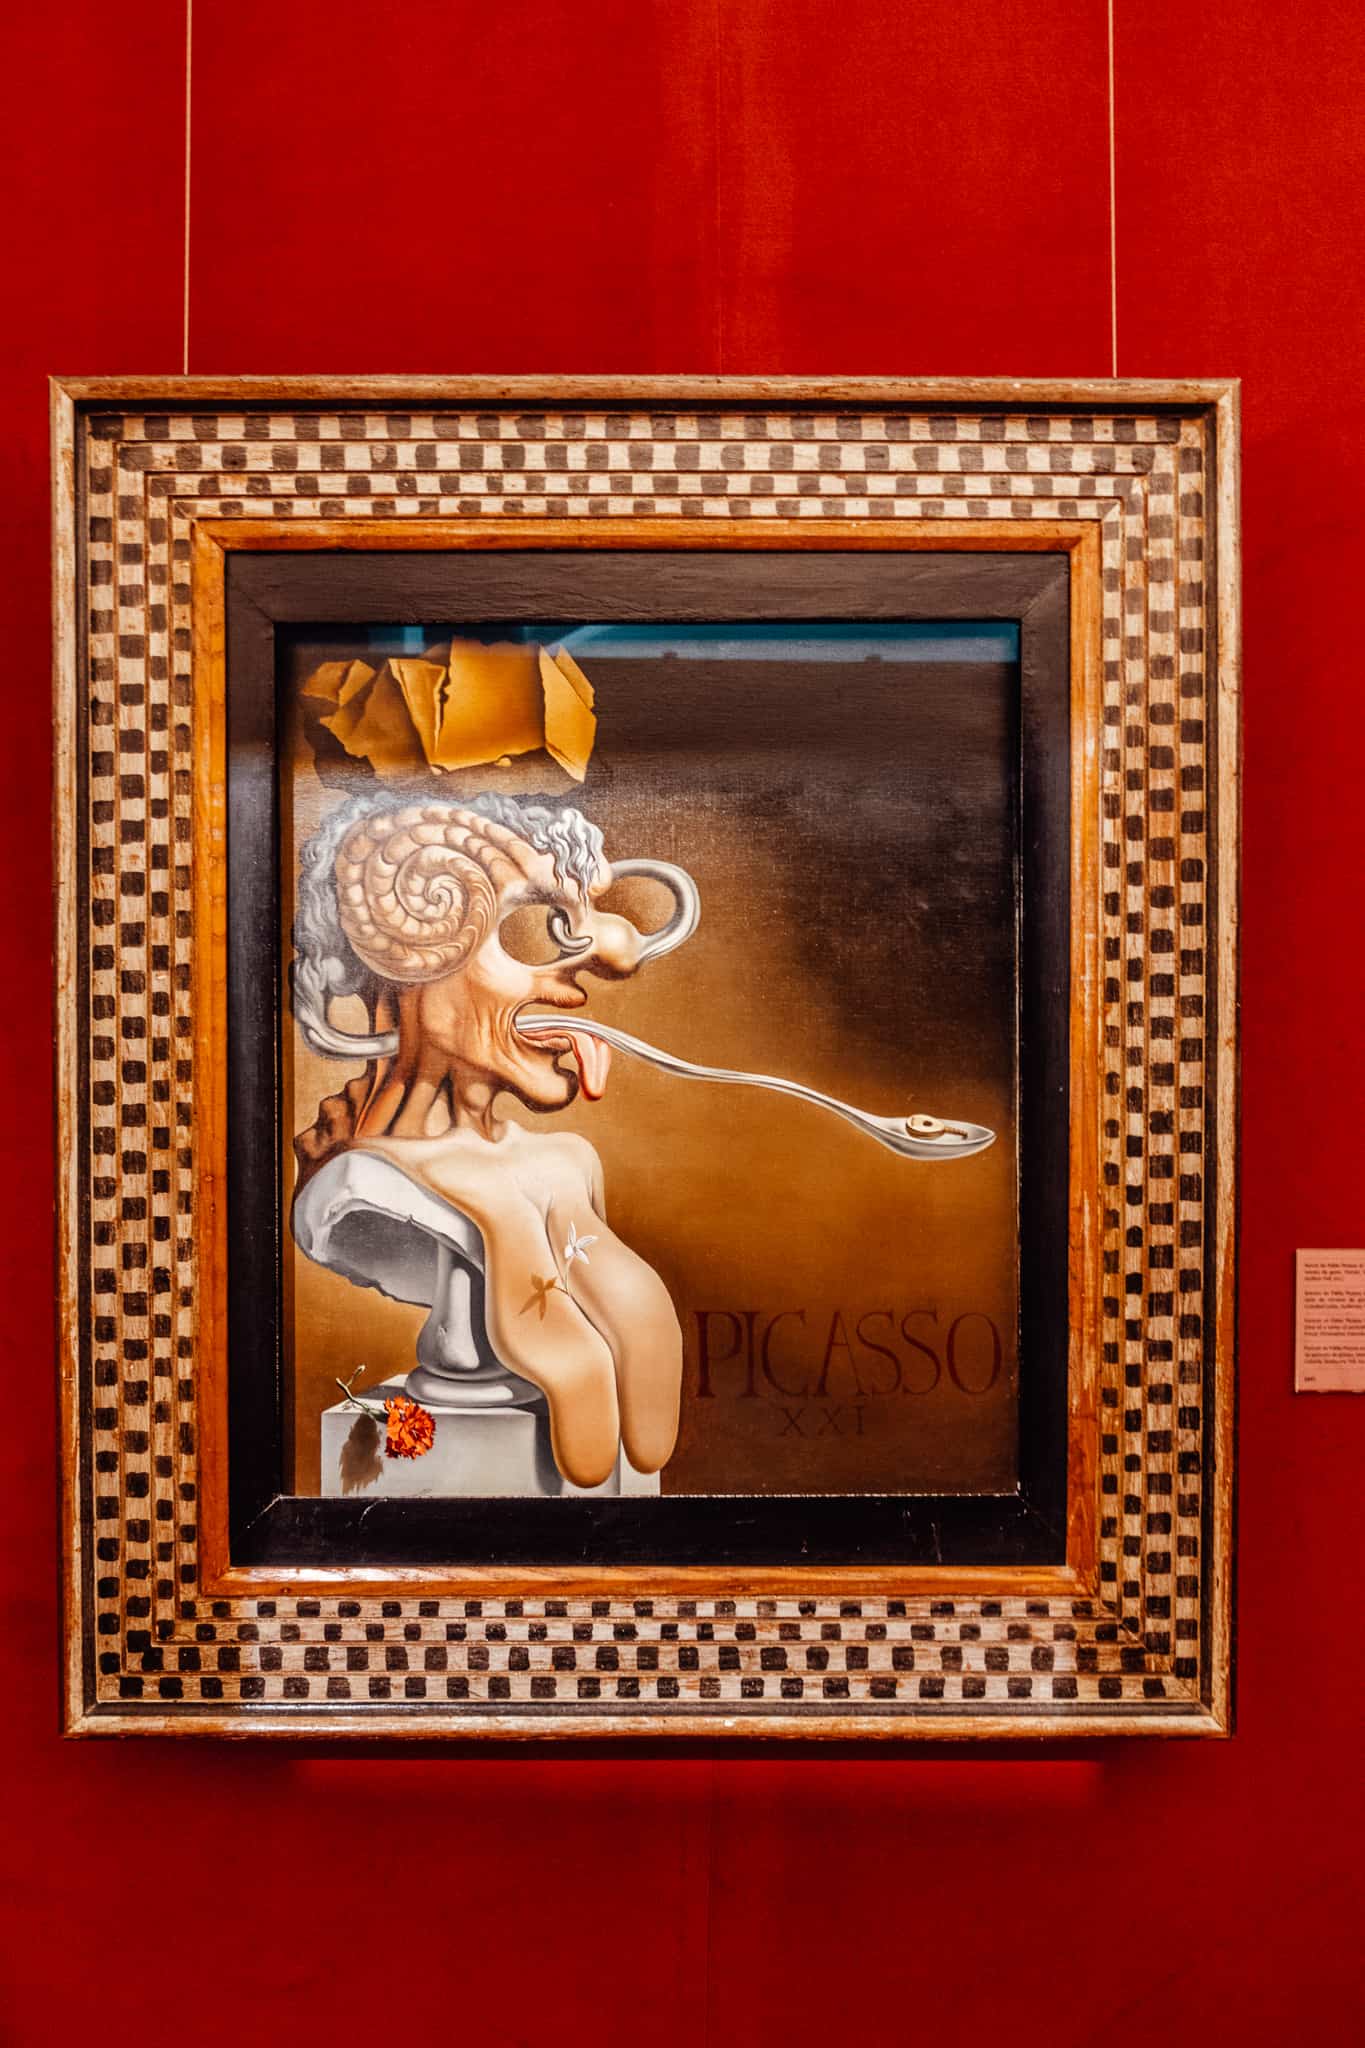 Portrait of Pablo Picasso in the Twenty-first Century (One of a series of portraits of Geniuses: Homer, Dali, Freud, Christopher Columbus, William Tell, etc.) by Salvador Dali in the Dali Theatre Museum in Figueres